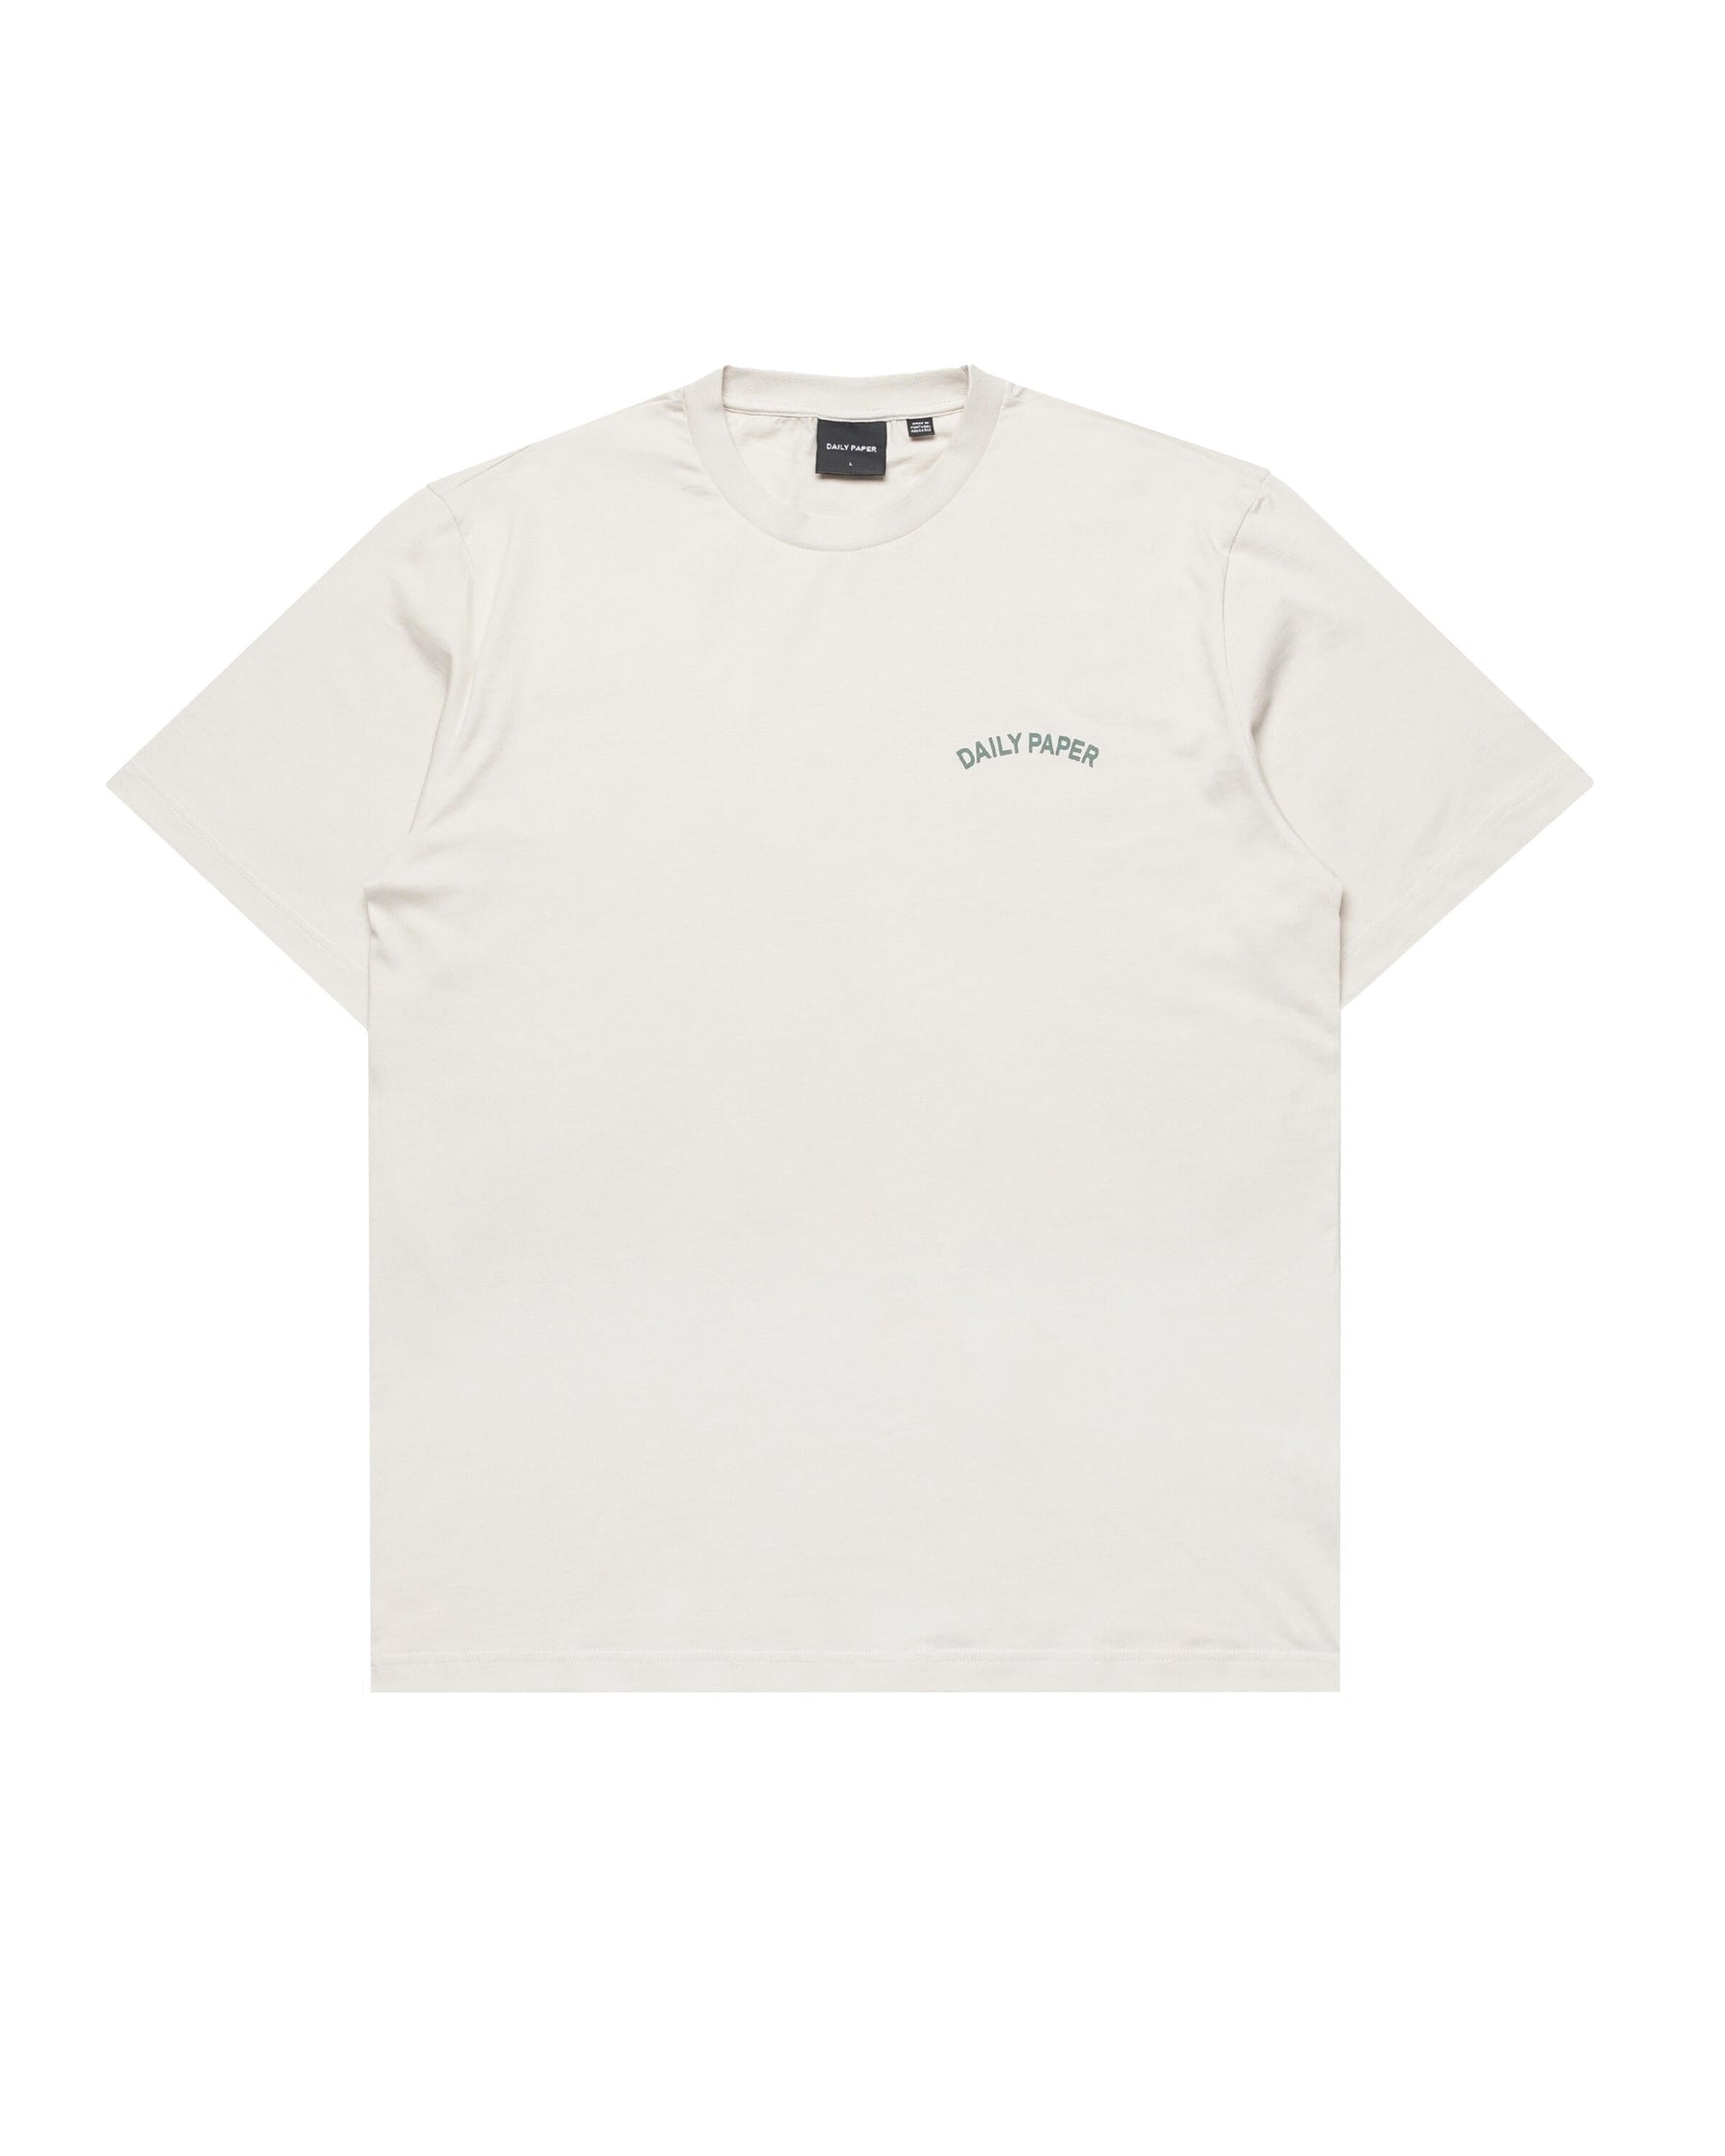 Daily Paper migration T-shirt